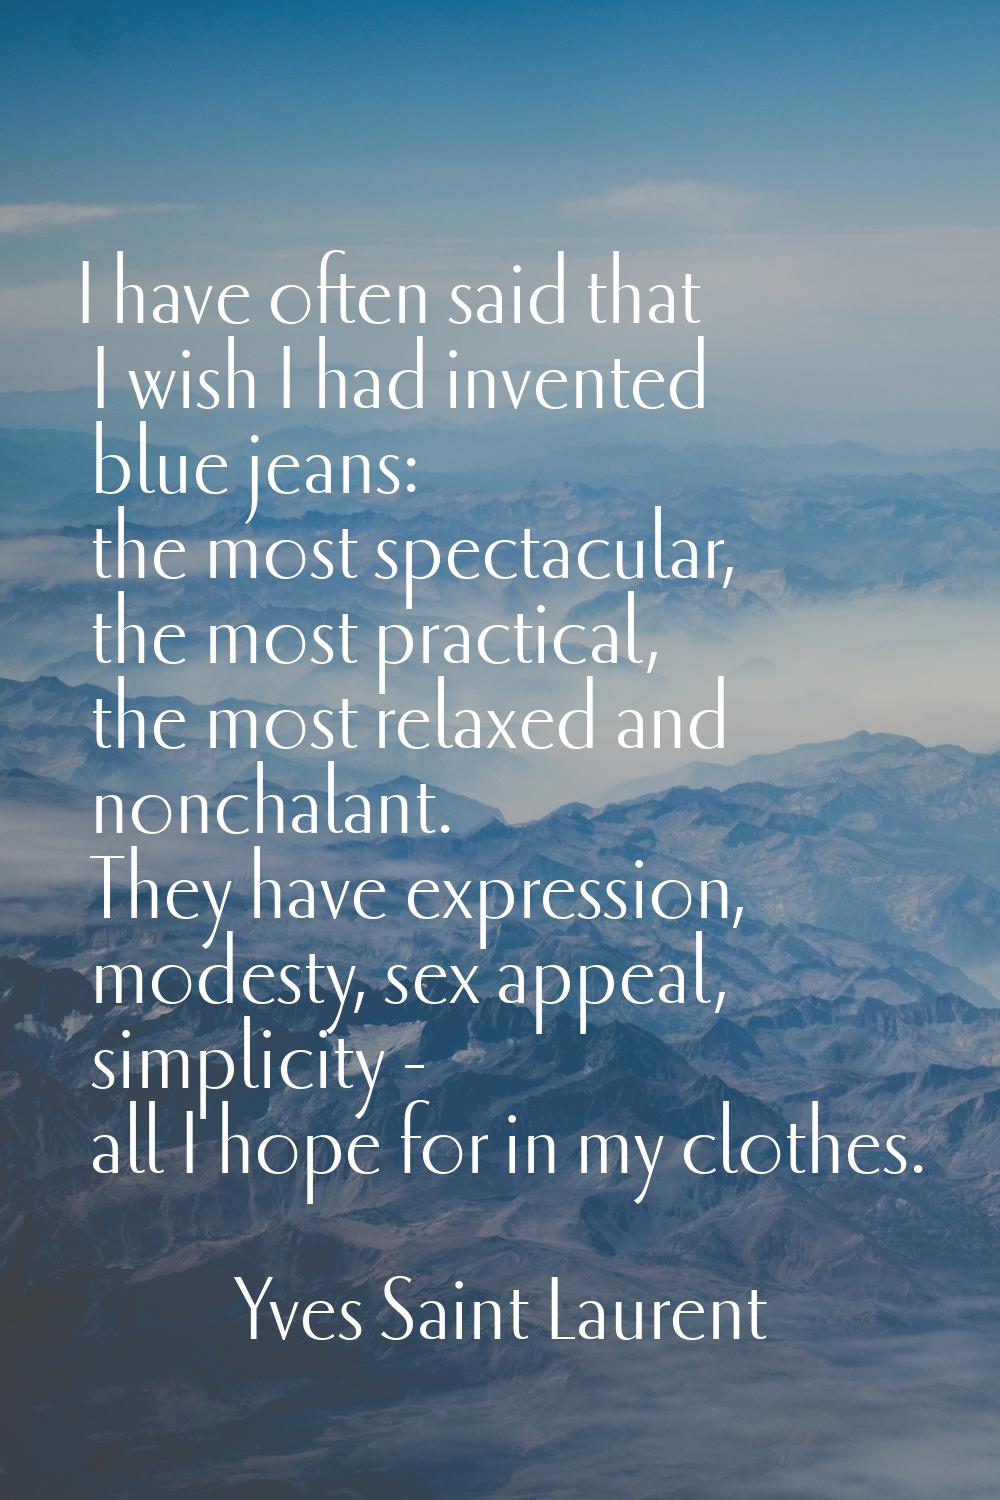 I have often said that I wish I had invented blue jeans: the most spectacular, the most practical, 